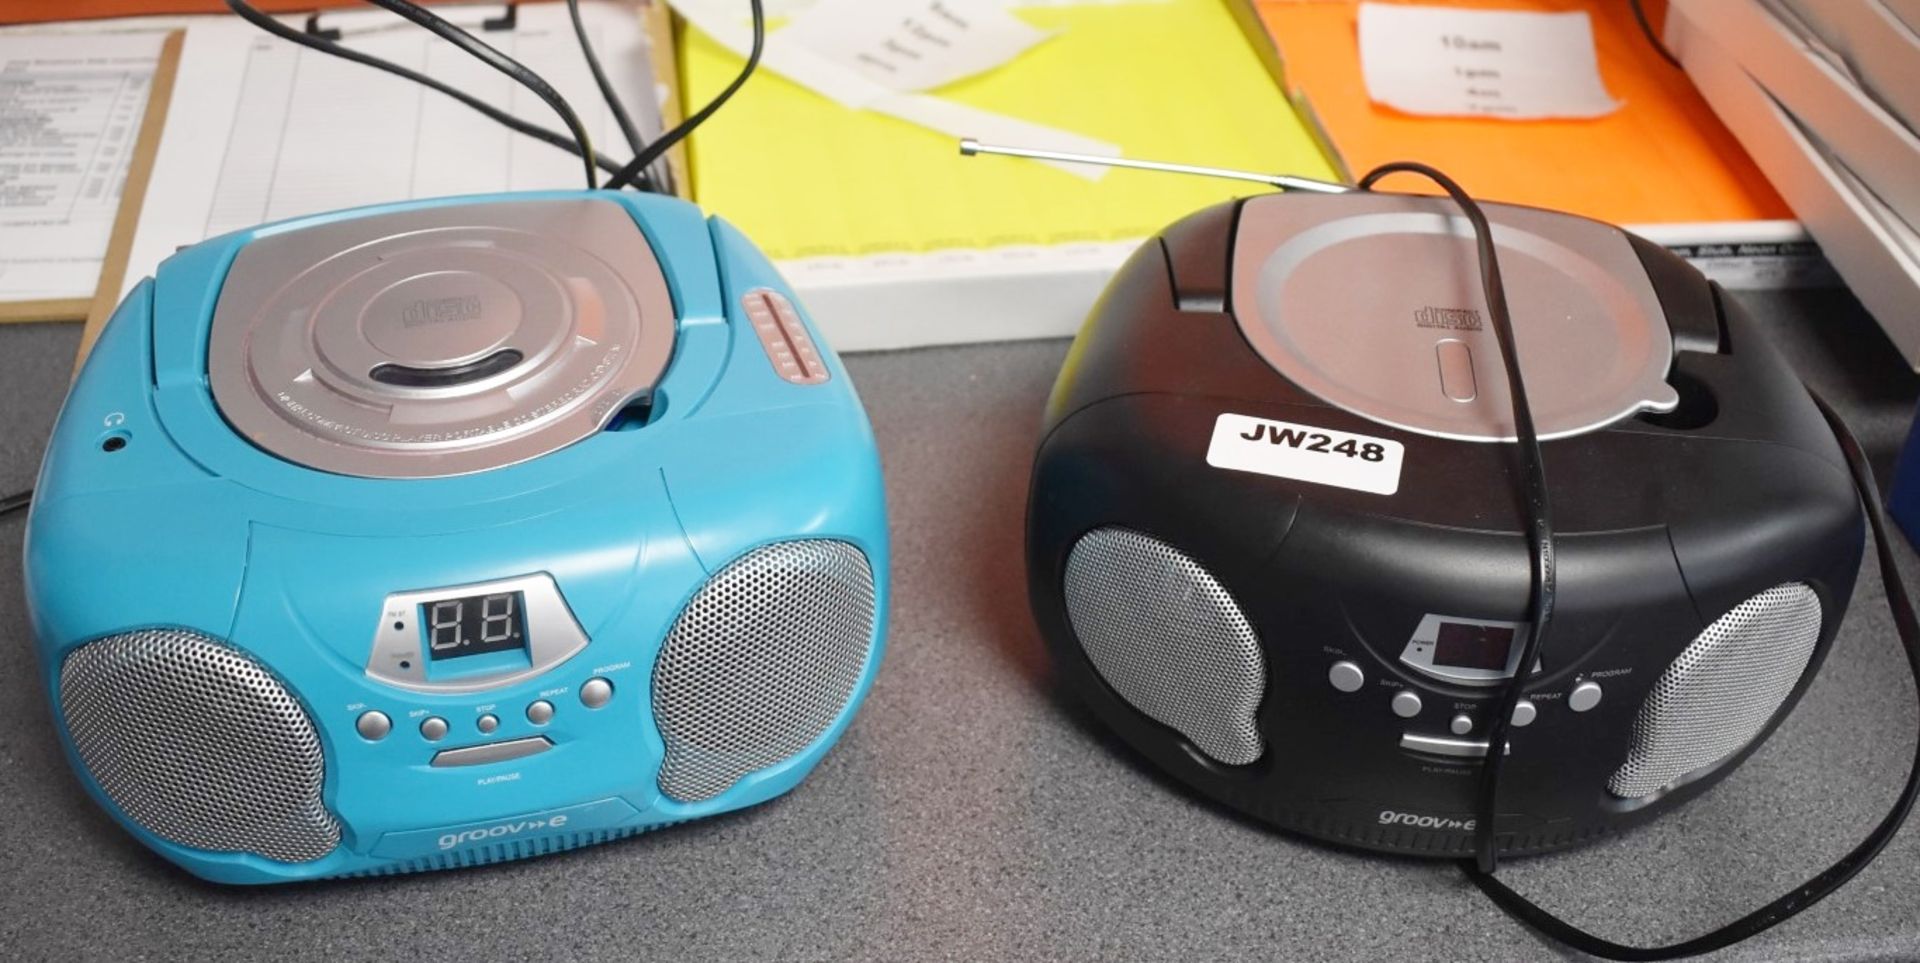 2 x Compact Stereo CD Players